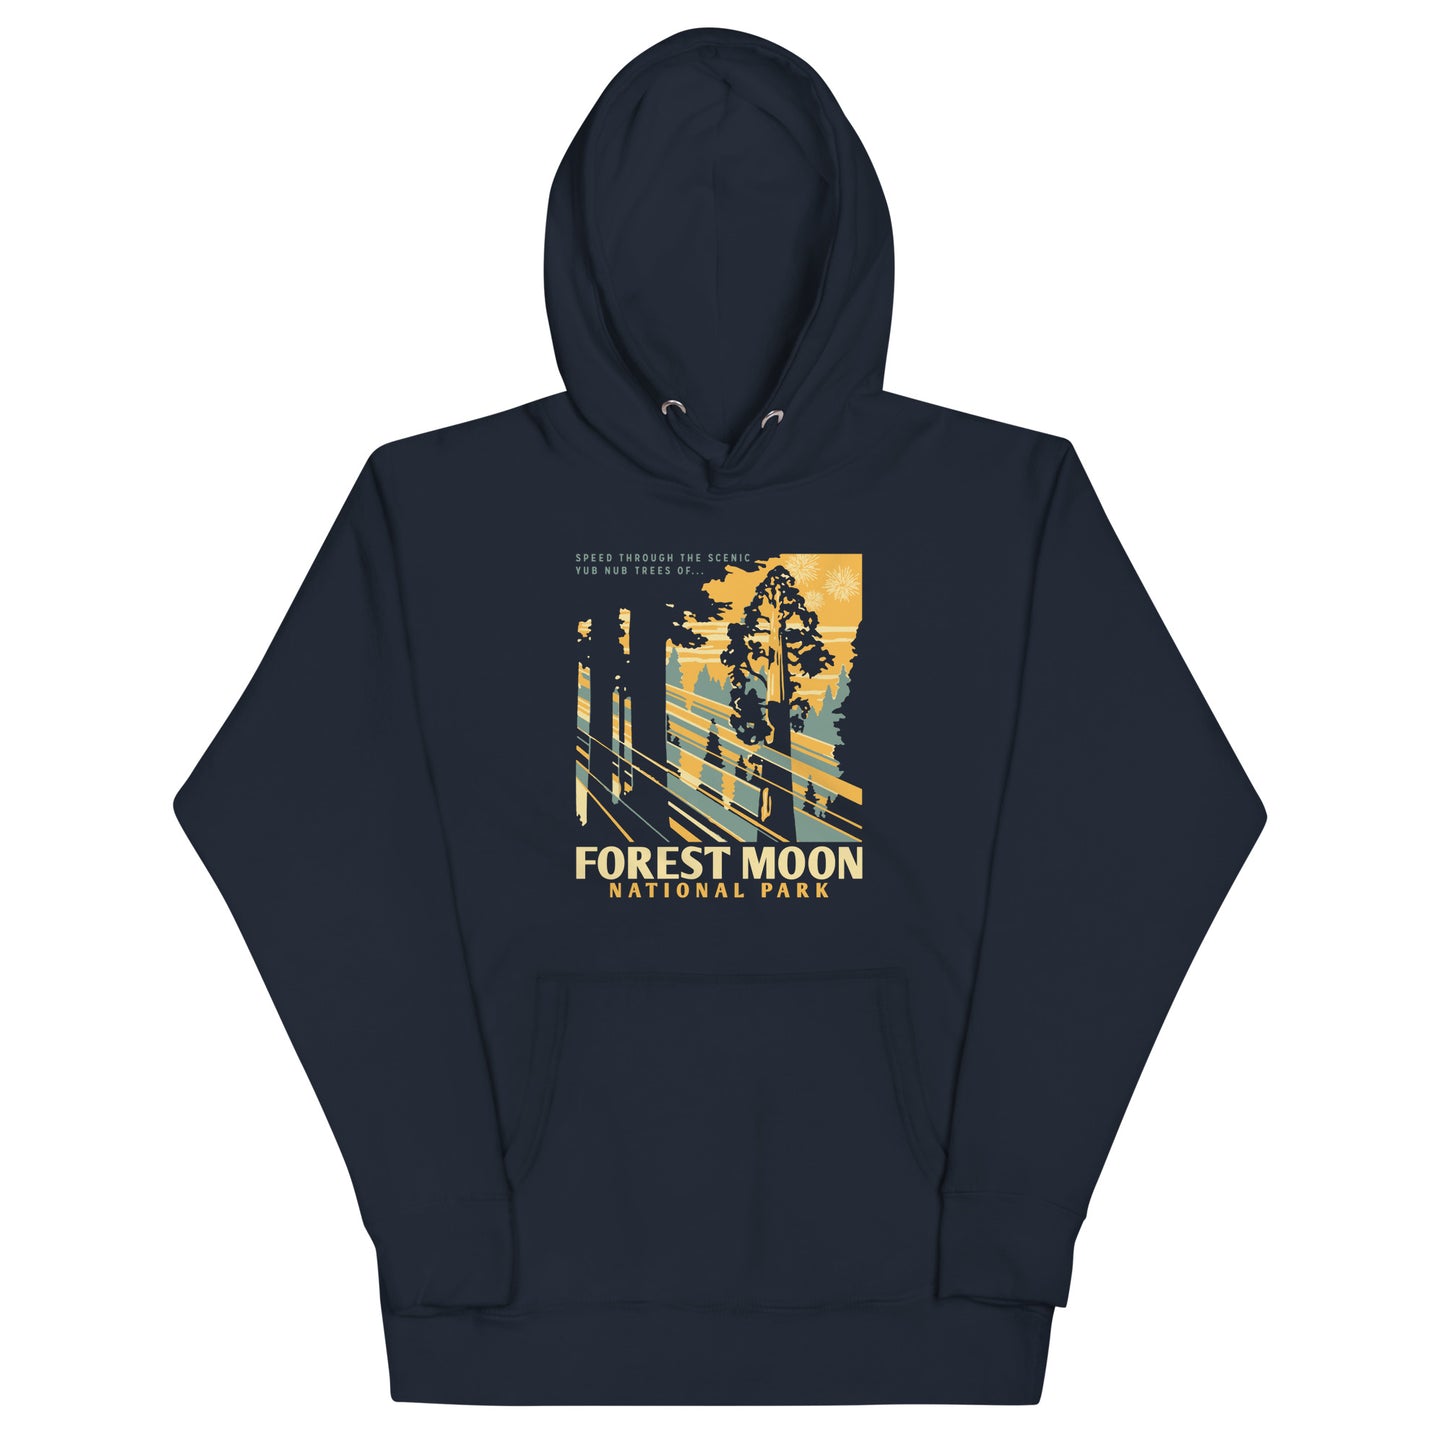 Forest Moon National Park Unisex Hoodie